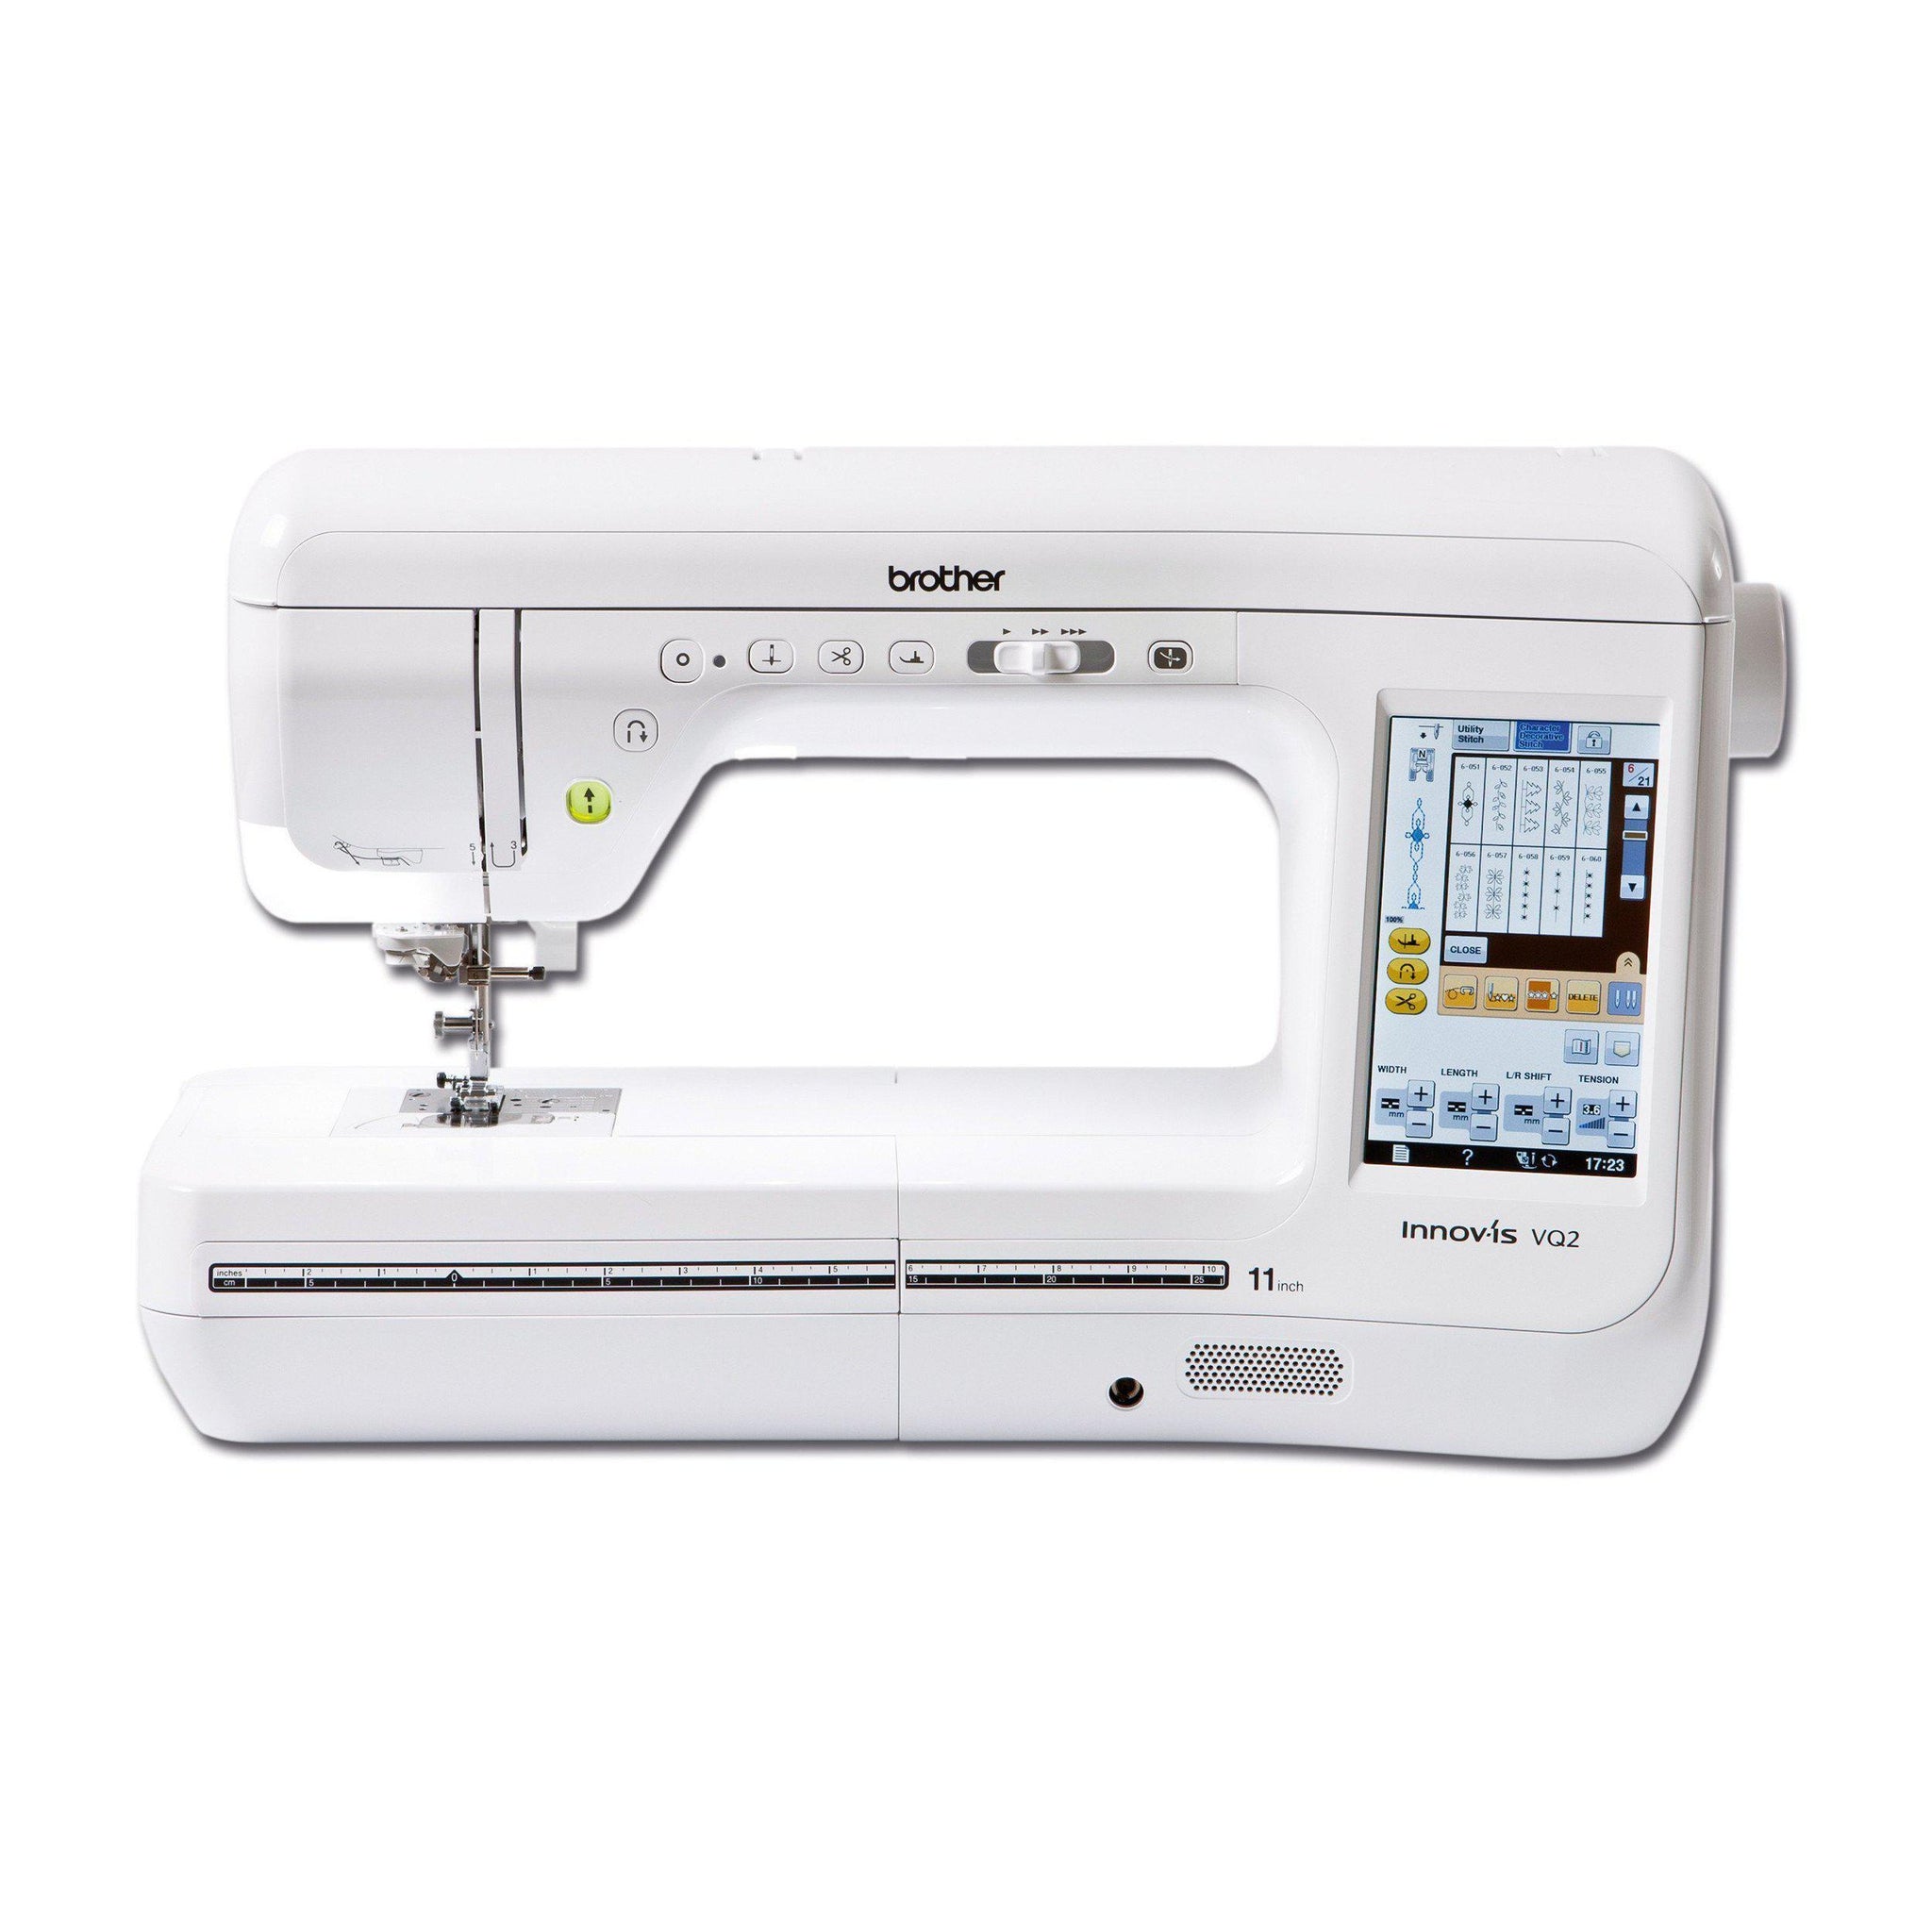 VQ2　Sewing　Brother　Sewing　Mouse　–　Innovis　Fabric　Machine　Machines